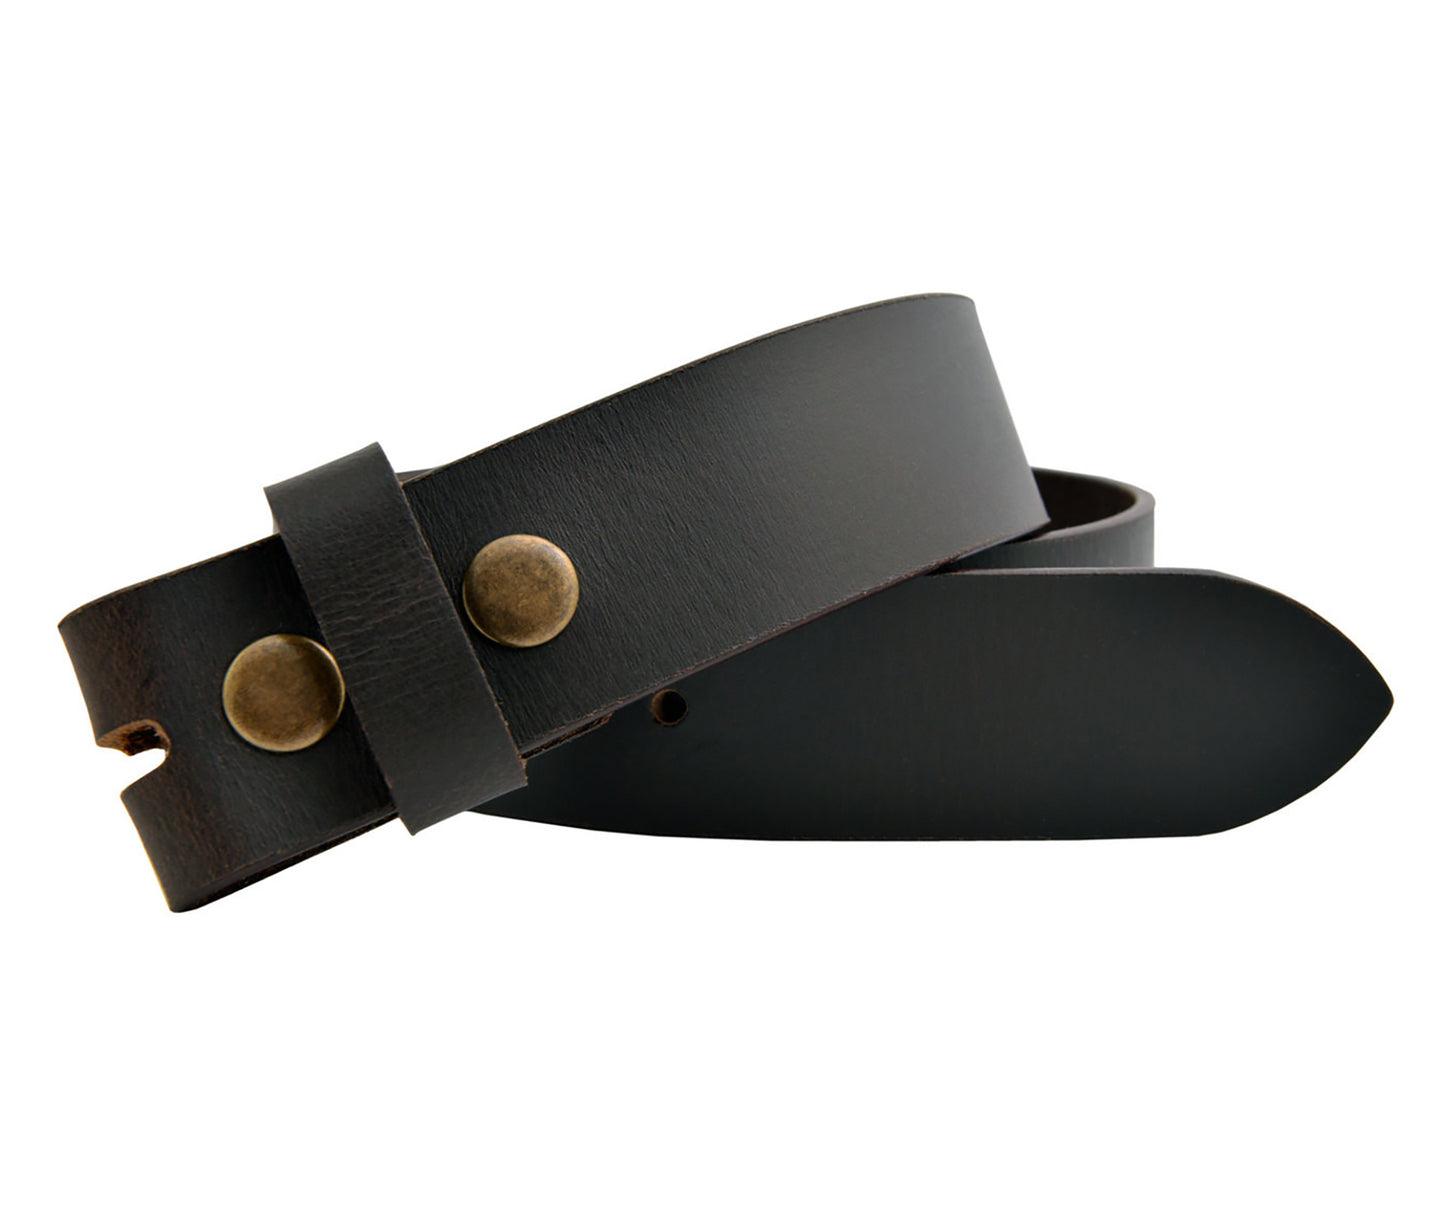 Full Grain Solid Leather Belt Strap - Brown - TBS5500-200